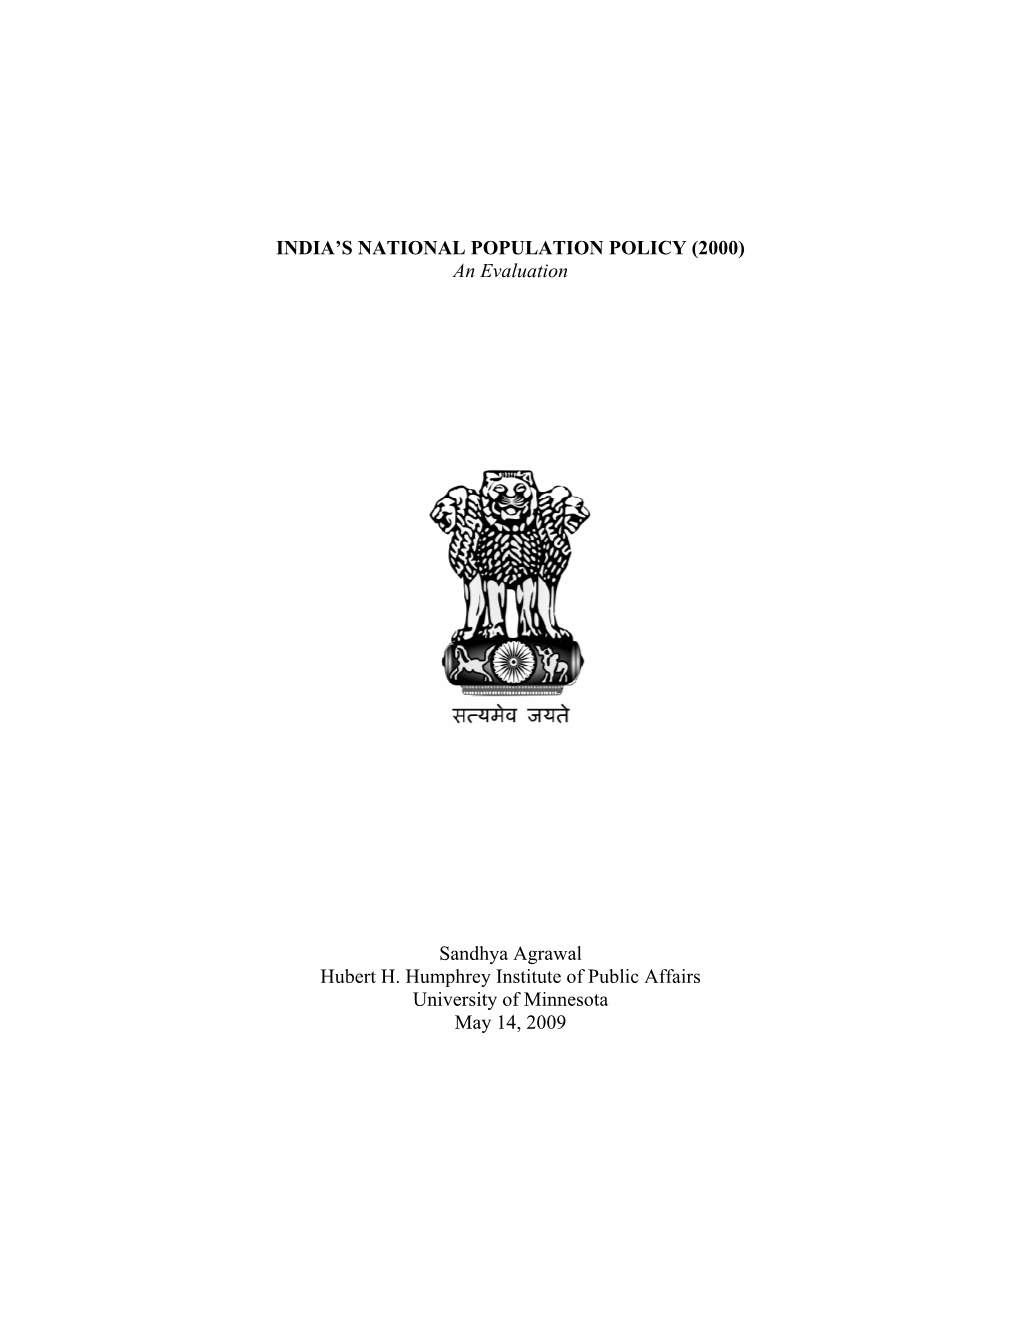 INDIA's NATIONAL POPULATION POLICY (2000) an Evaluation